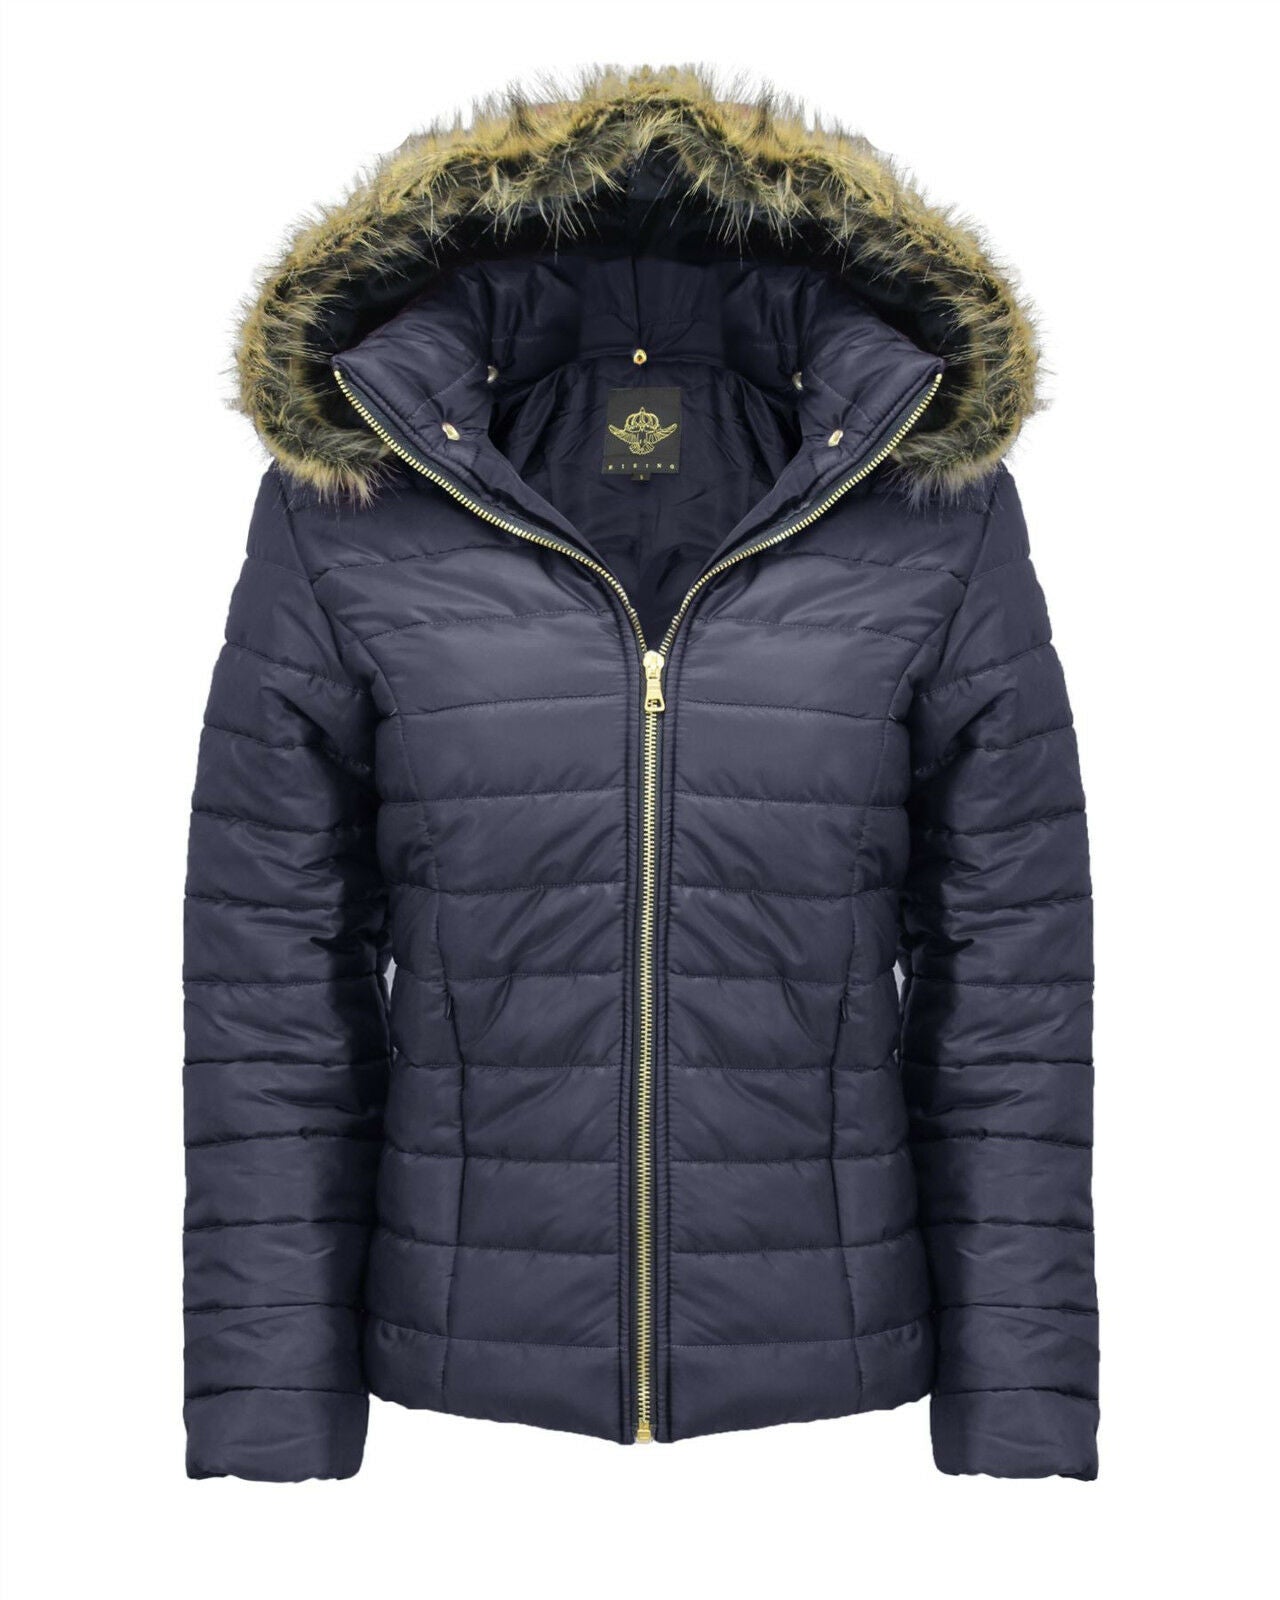 Ladies Navy Wet Look Short Length Coat. It Has A Detachable Fur Hood 2 Front Zip Pockets And Is a Zip Up Coat. Available In Sizes 8-14.